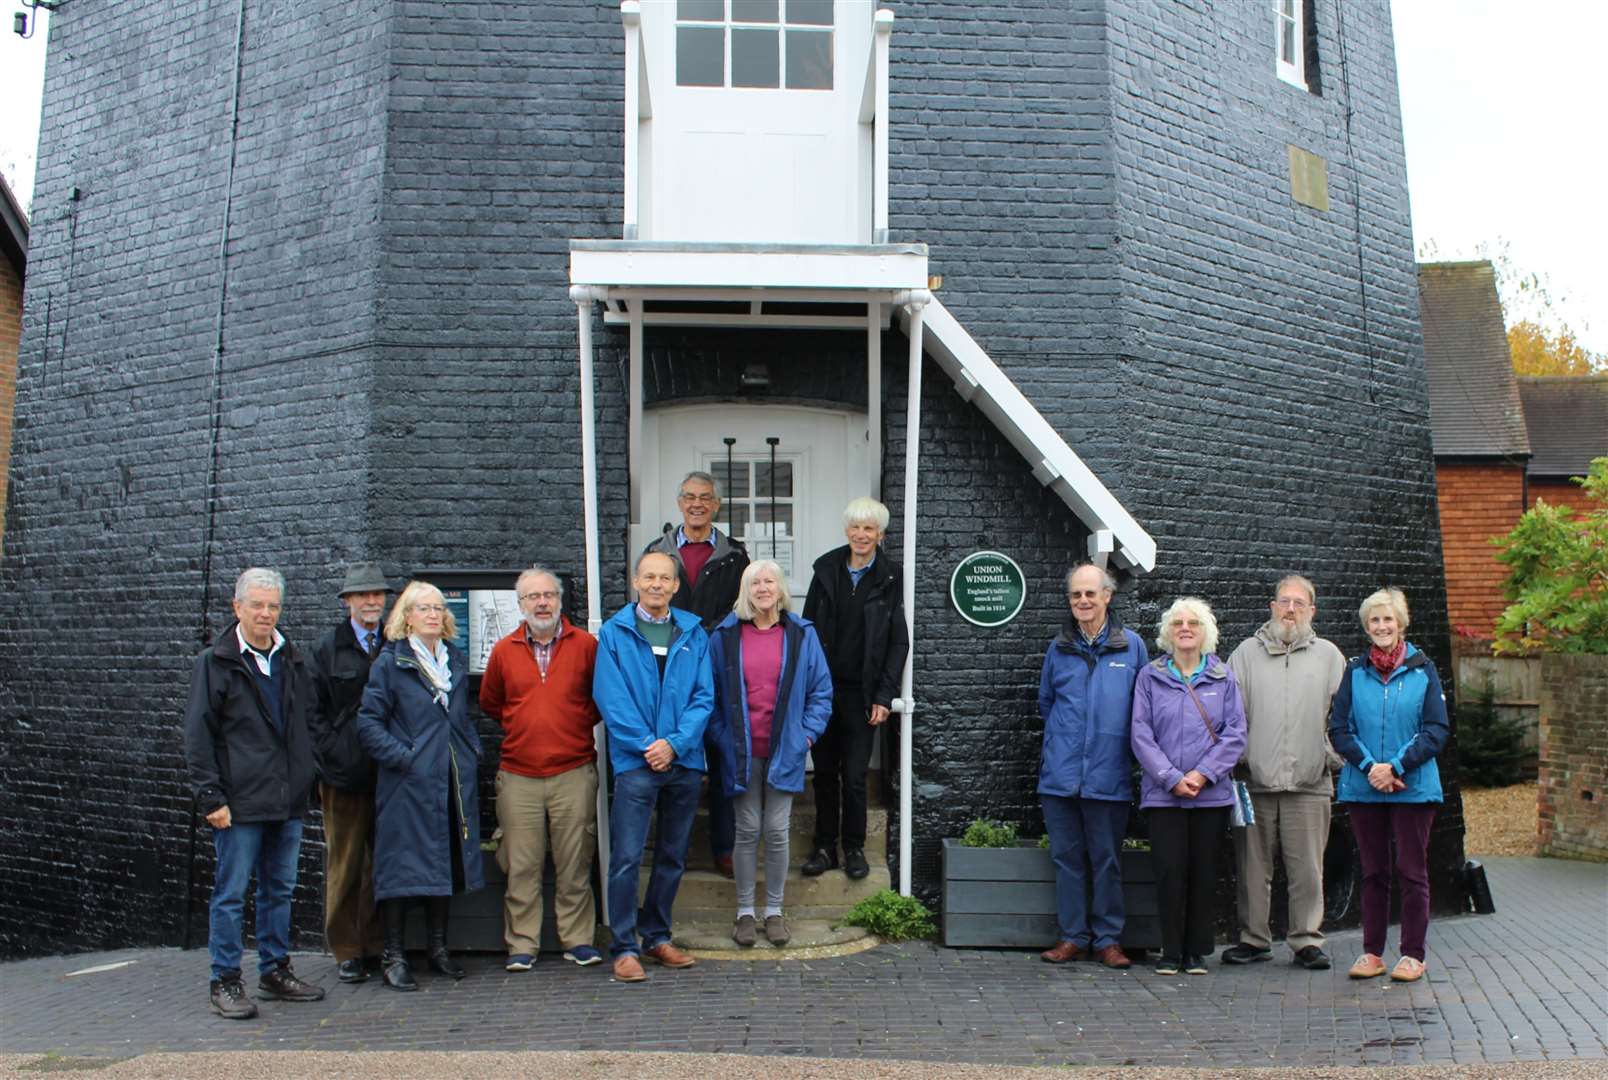 Some of the volunteer members of the Cranbrook Windmill Association